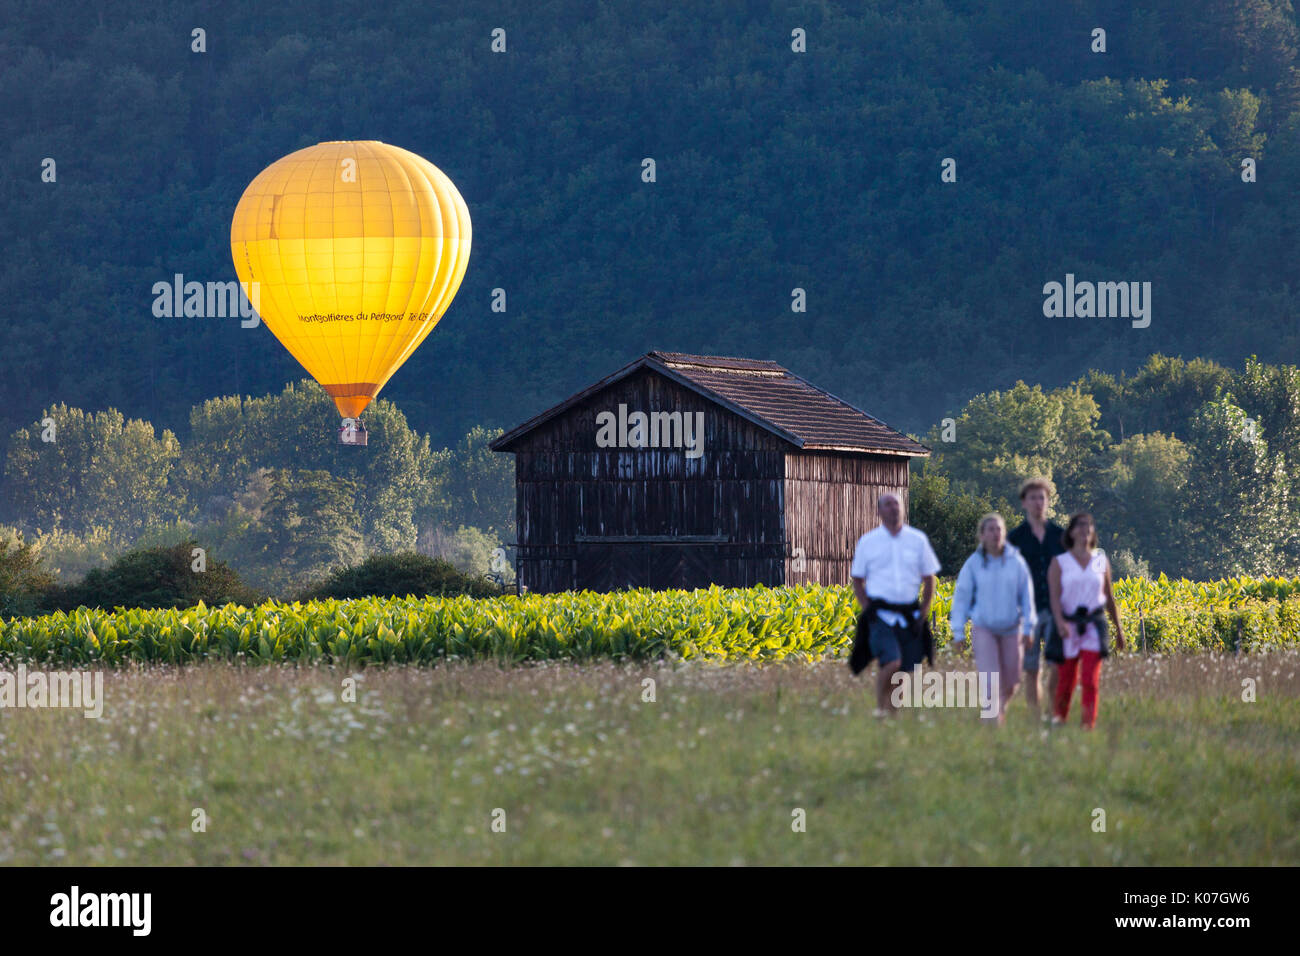 People Walking Across a Field with a Hot Air Balloon Illuminated by the Setting Sun Behind, Dordogne, France, Europe. Stock Photo